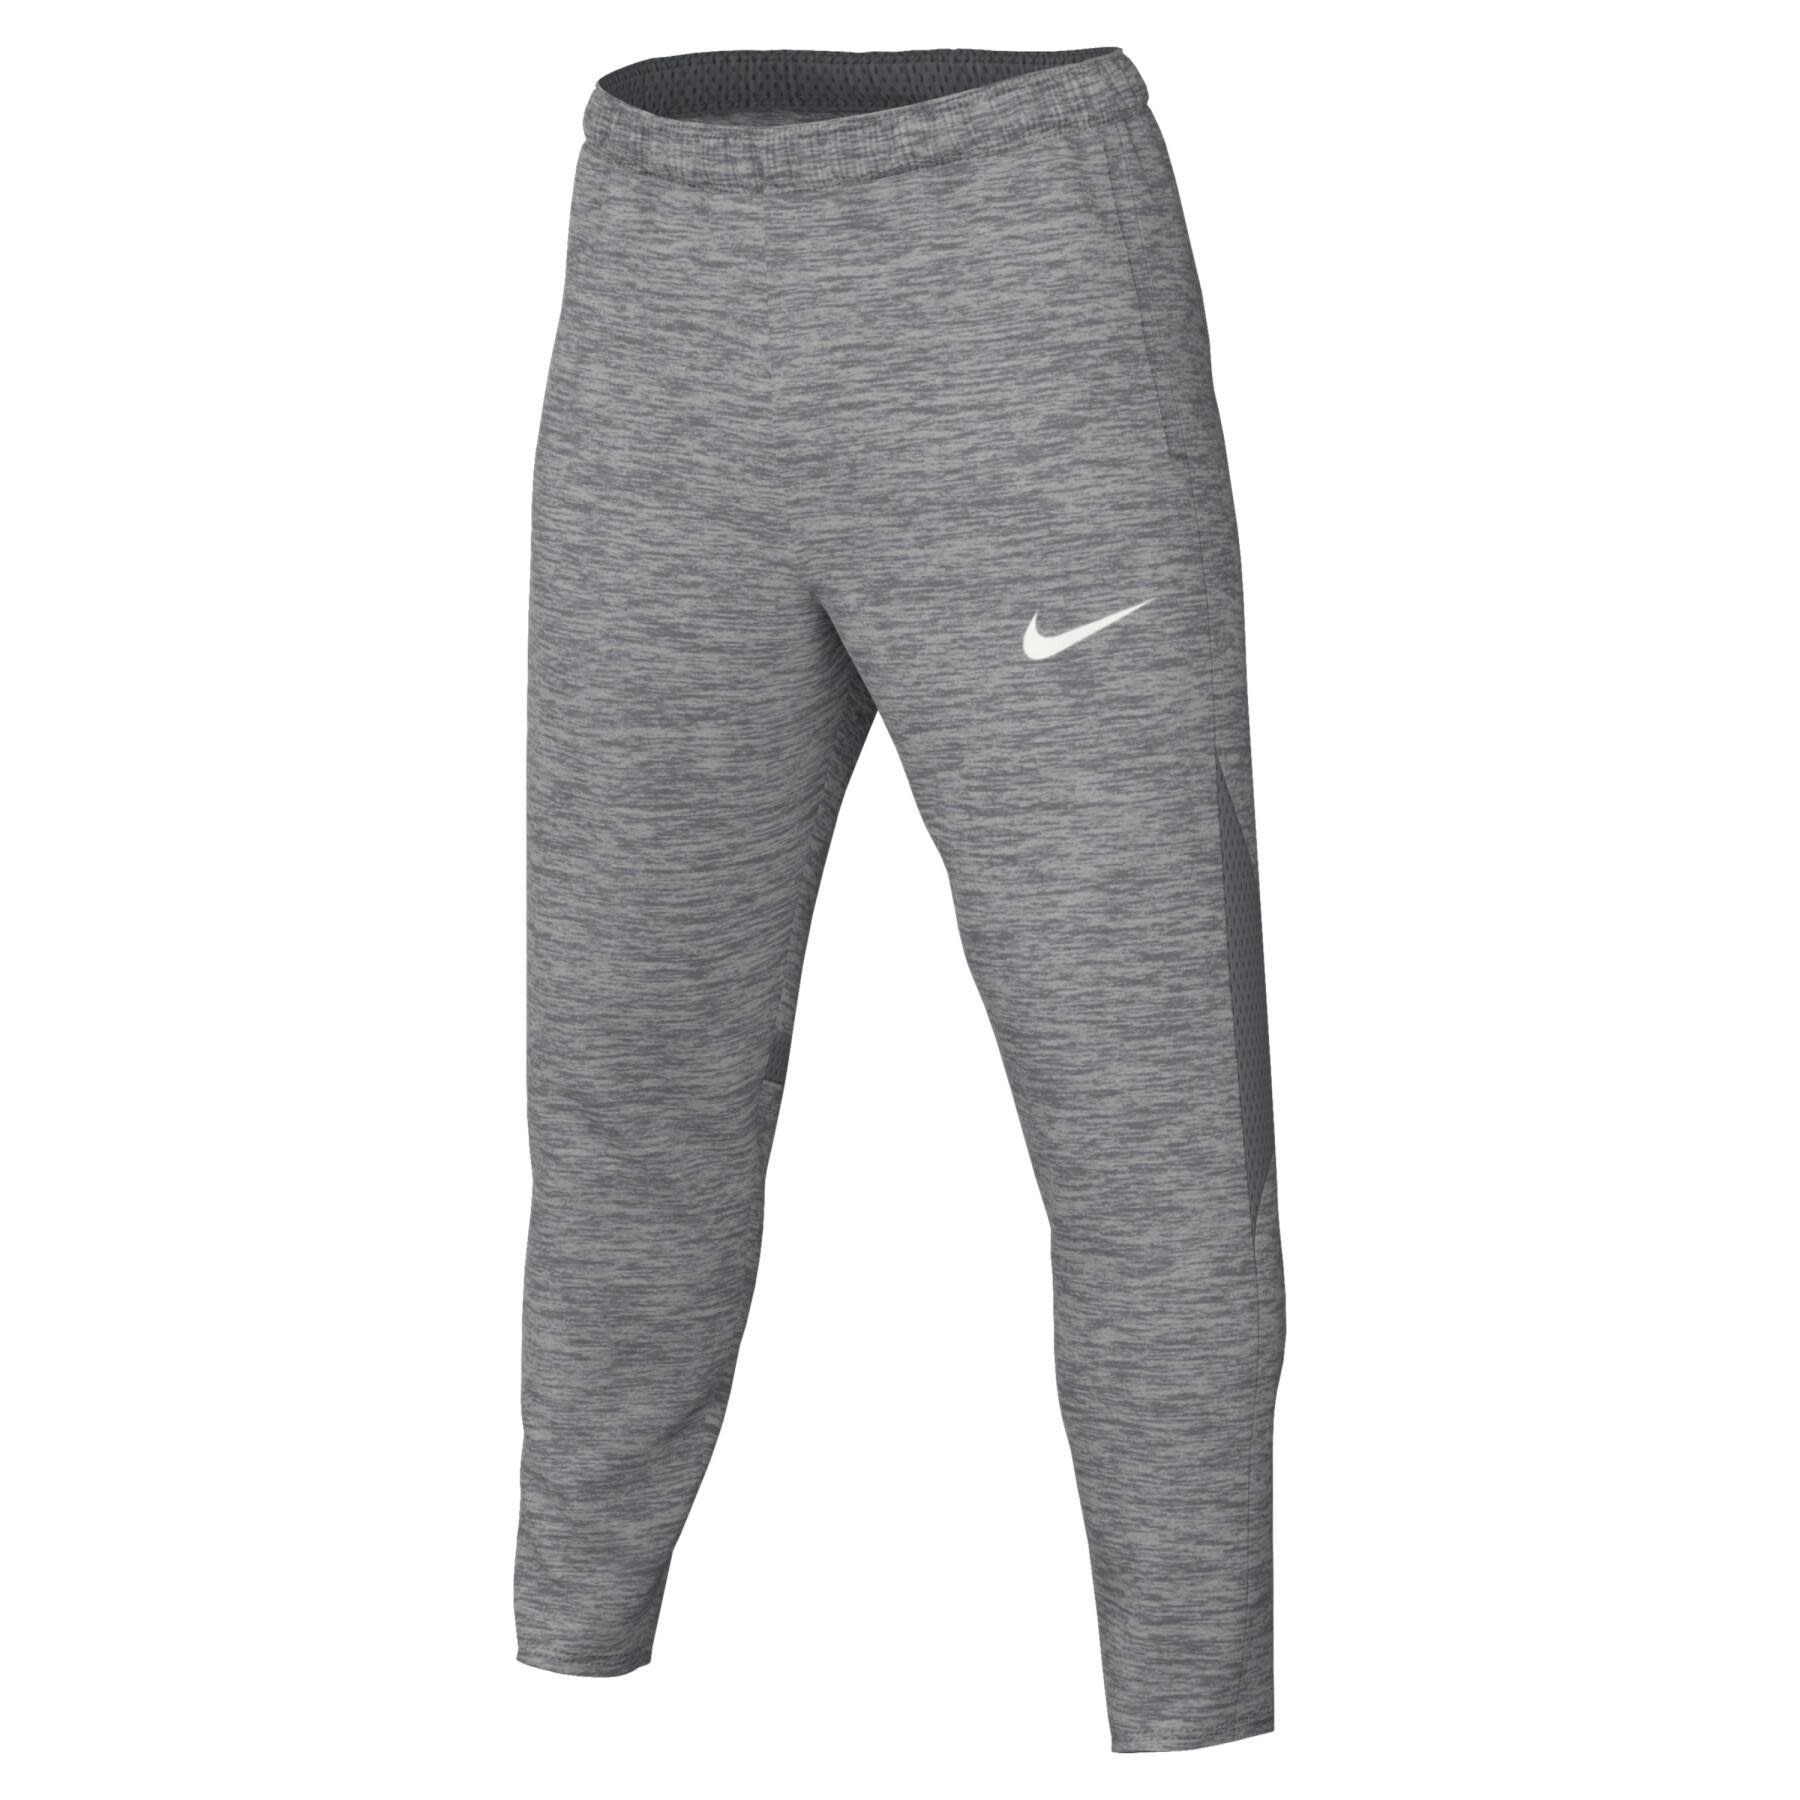 NIKE DRY-FIT ACADEMY PRO PANT BLACK/ ANTHRACITE XL, XL